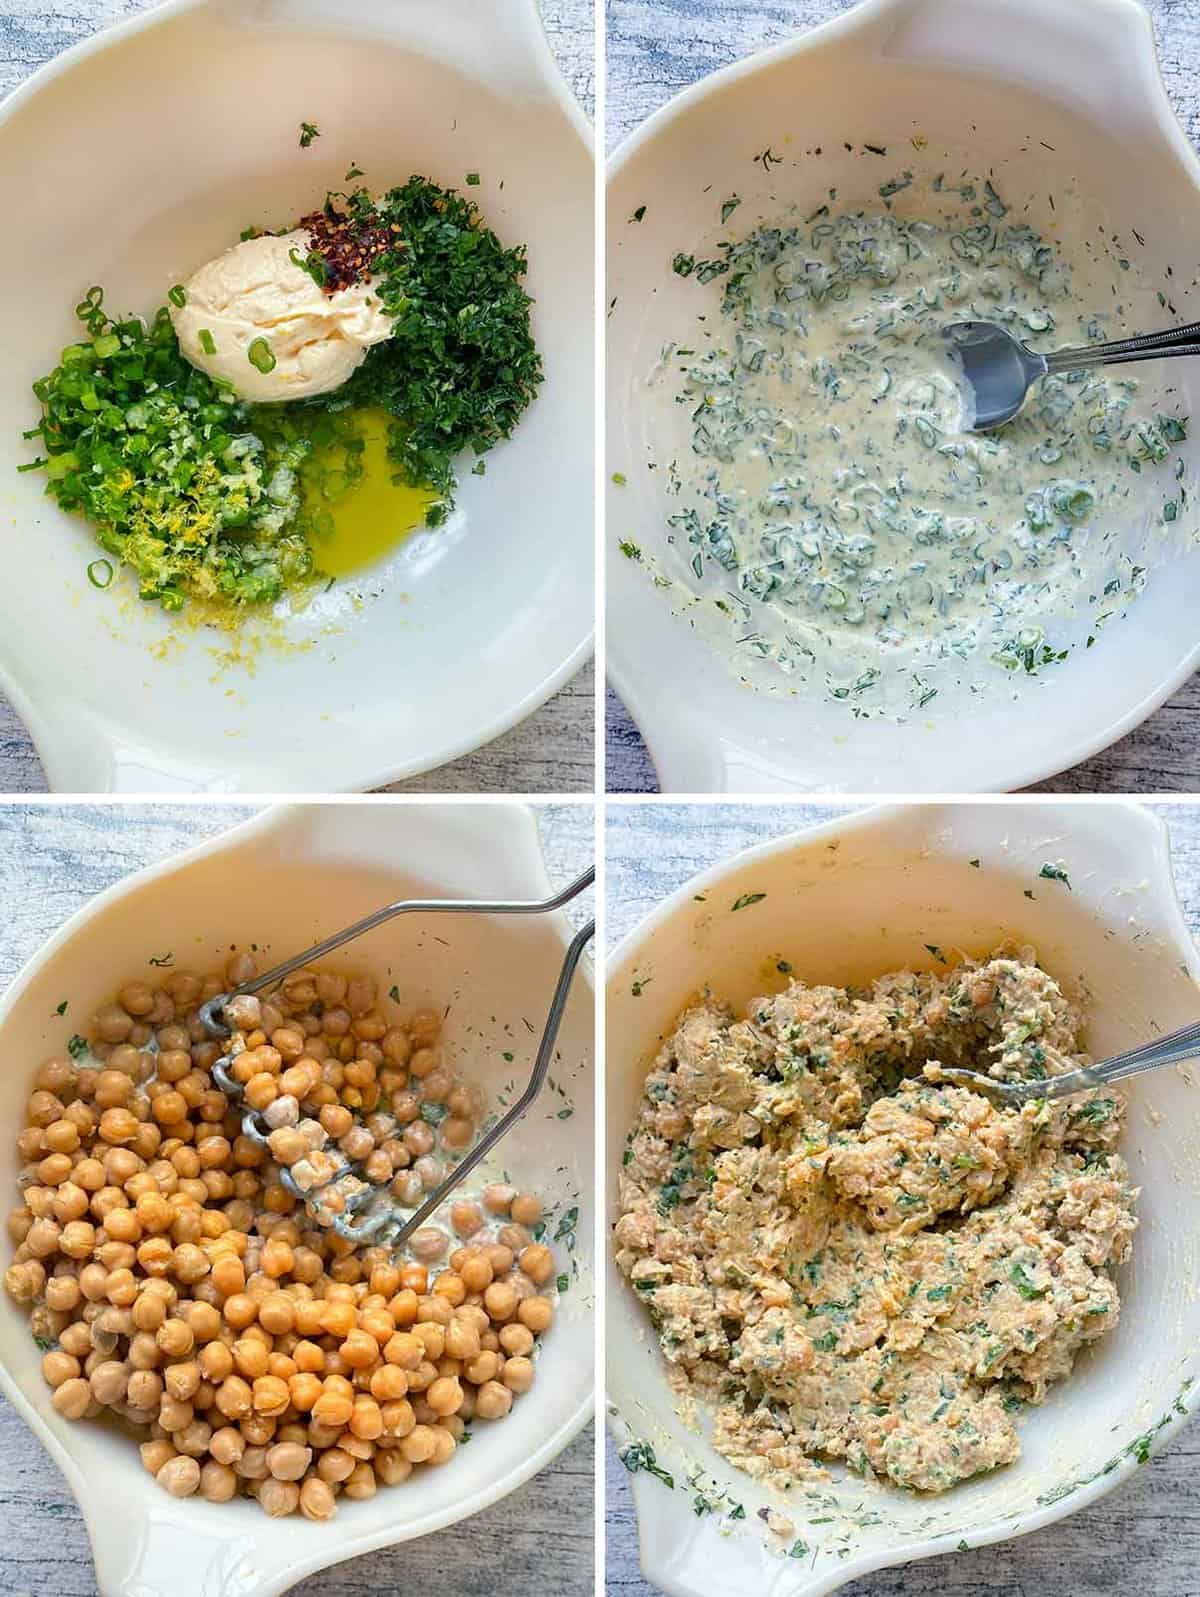 Process collage showing how to mix chickpea salad for sandwiches, mixing a lemon garlic herb mayo and then mashing chickpeas directly into it with a potato masher.